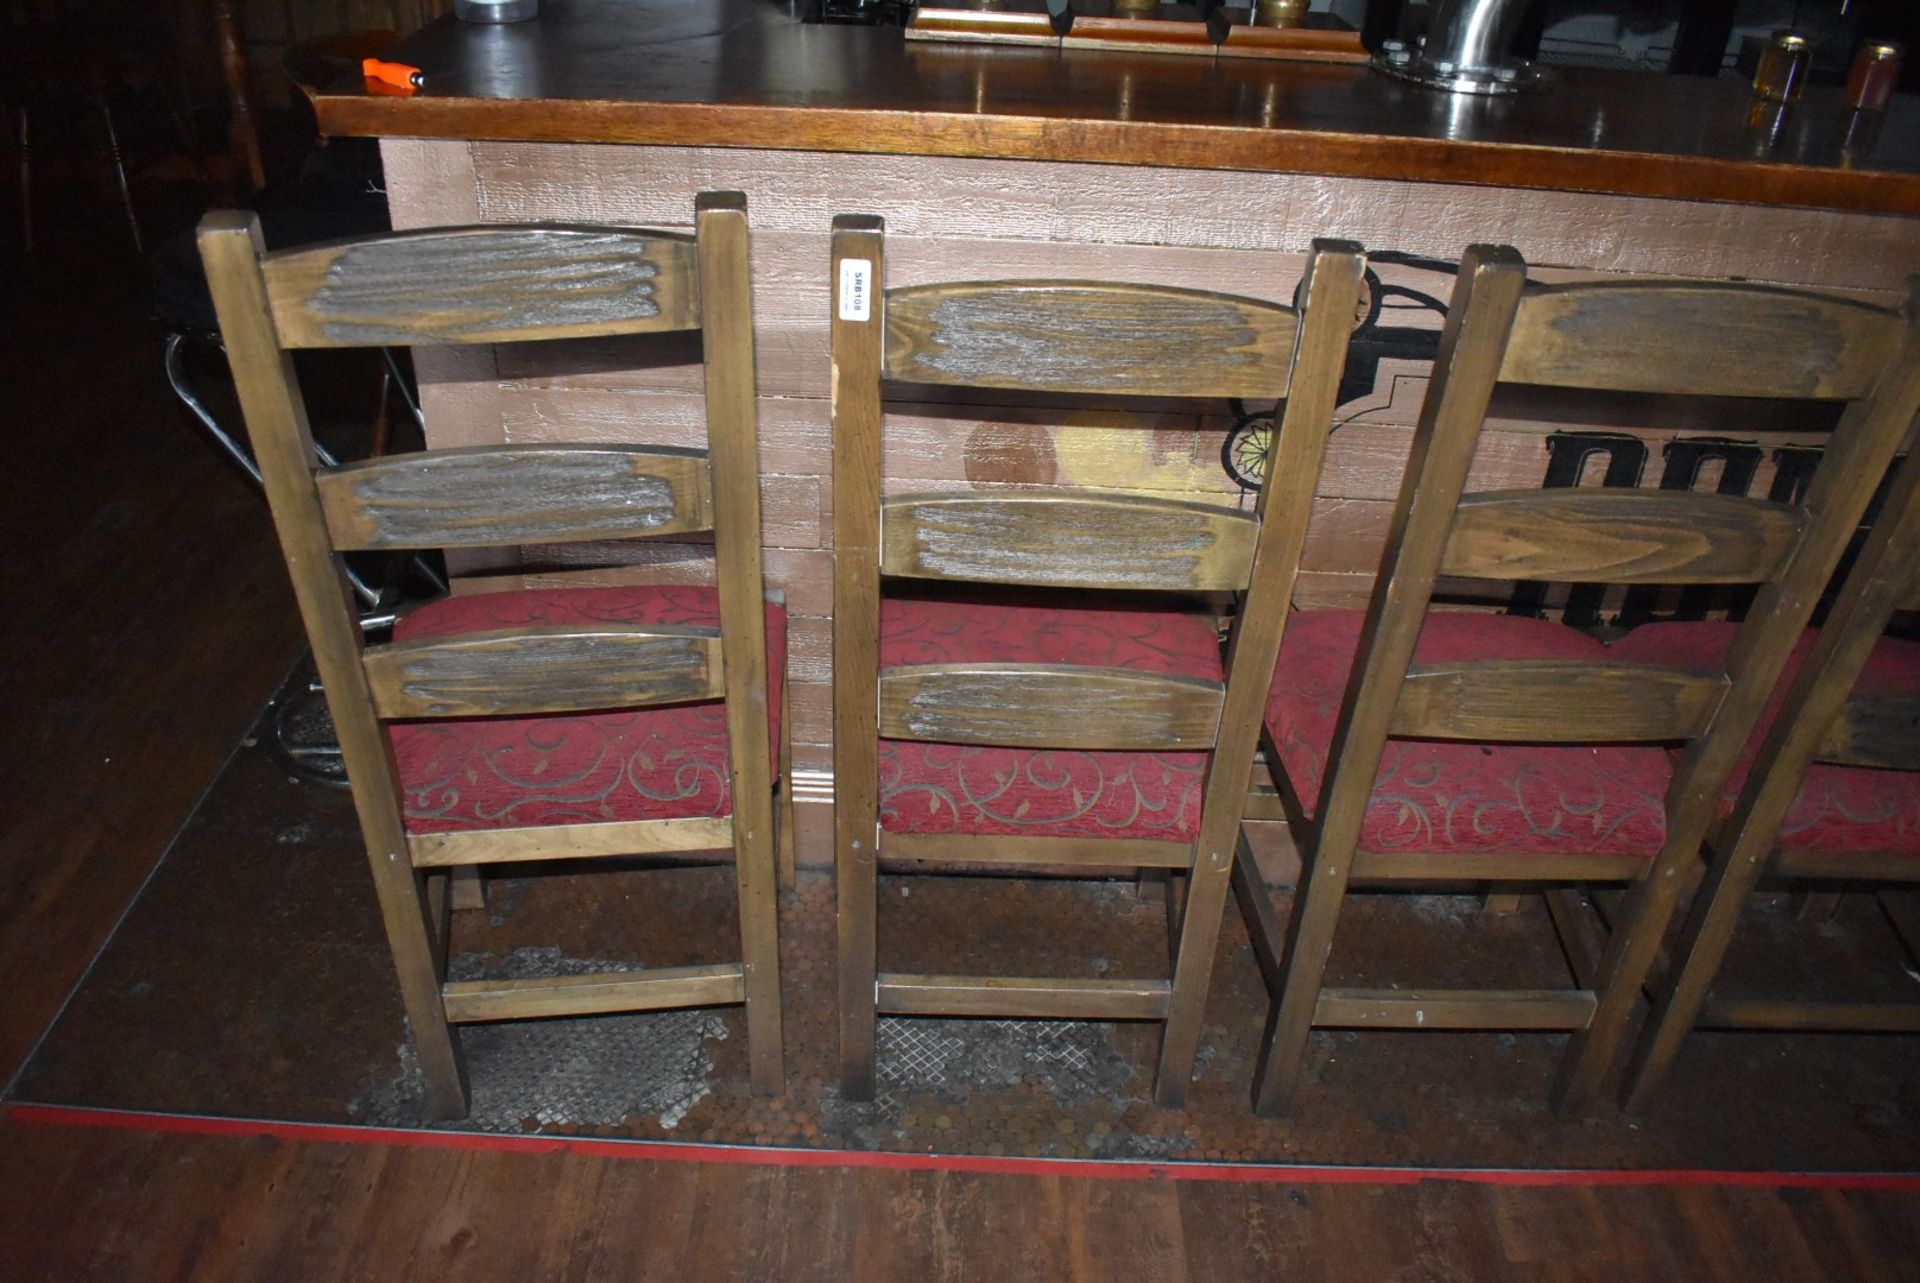 Approx 30 x Various Restaurant / Pub Chairs and Stools - Many Vintage Chairs Included - CL586 - - Image 9 of 10